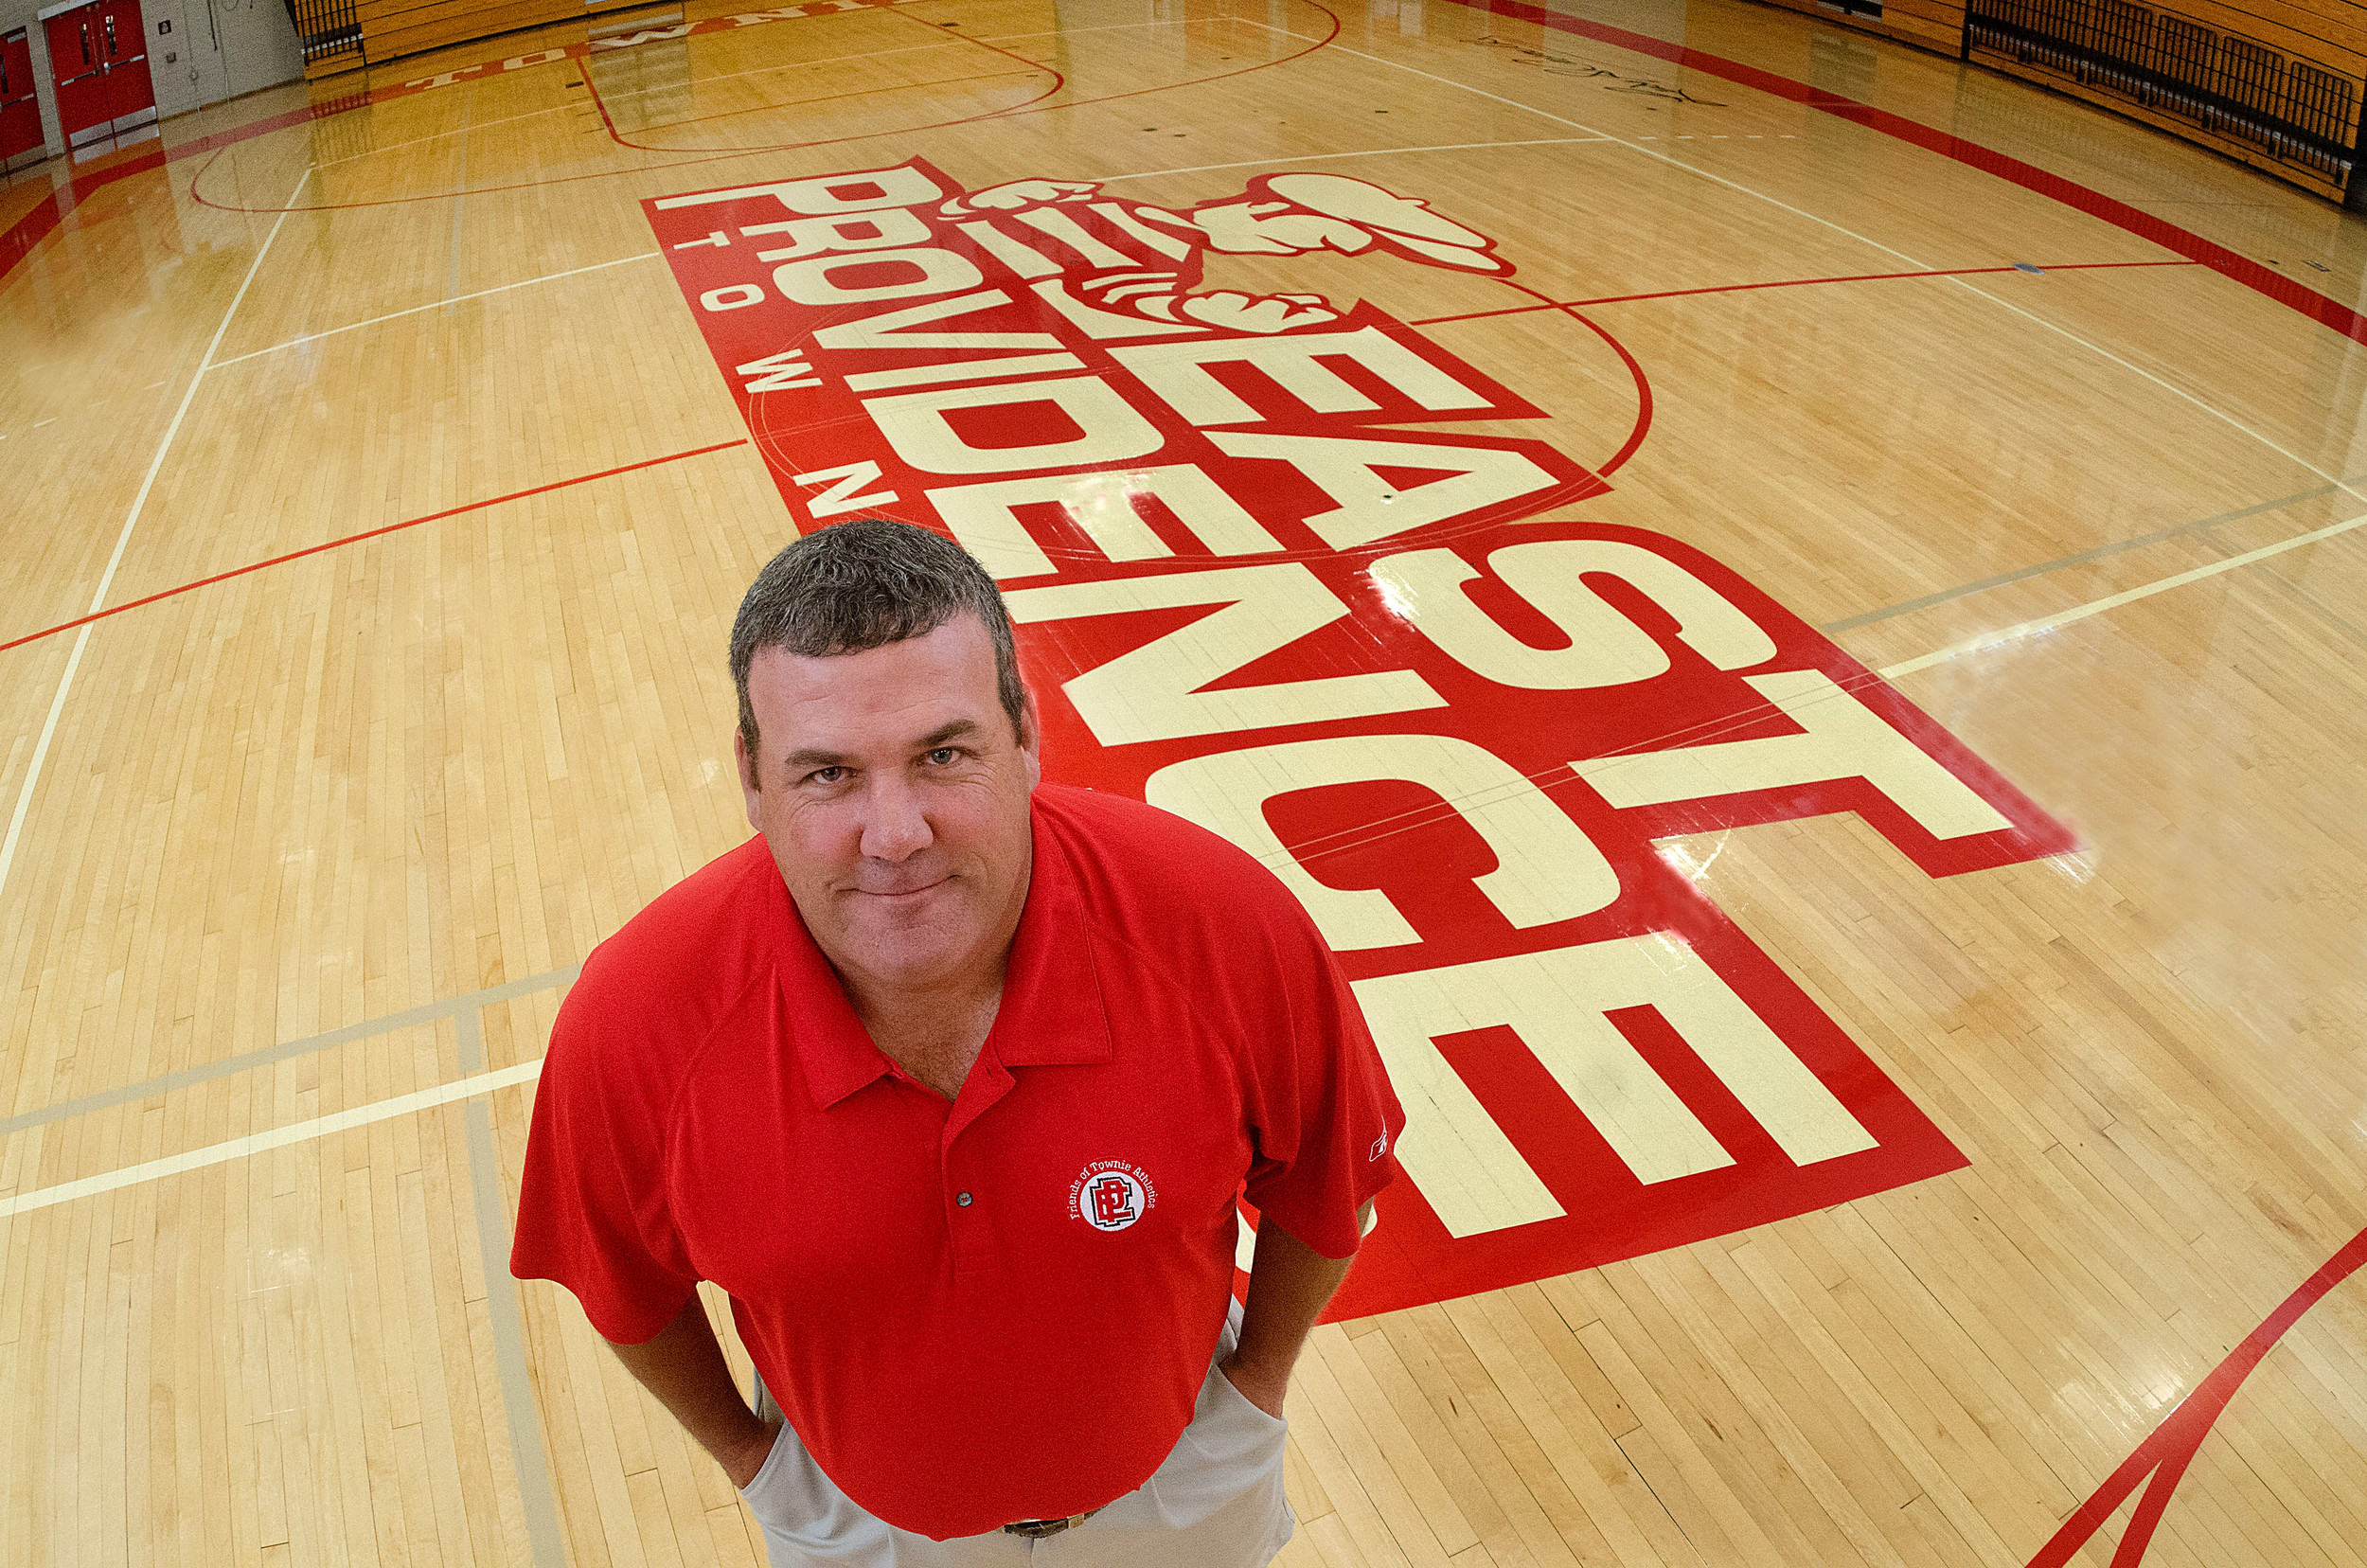 Long-time East Providence High School teacher and coach Gregg Amore is the new district athletic director.